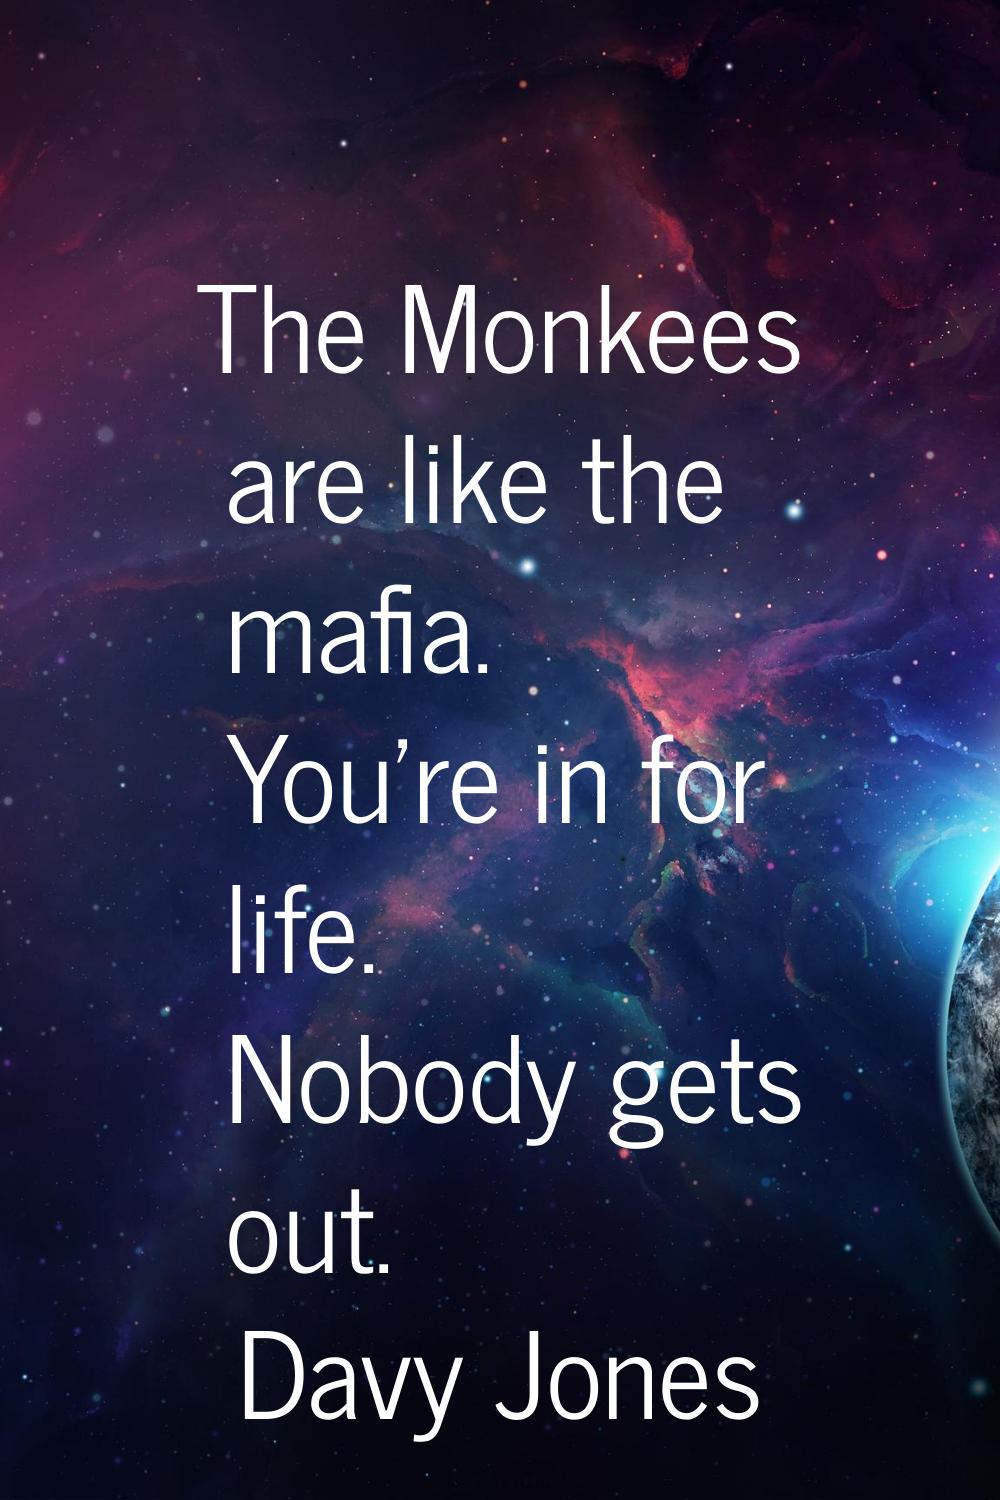 The Monkees are like the mafia. You're in for life. Nobody gets out.